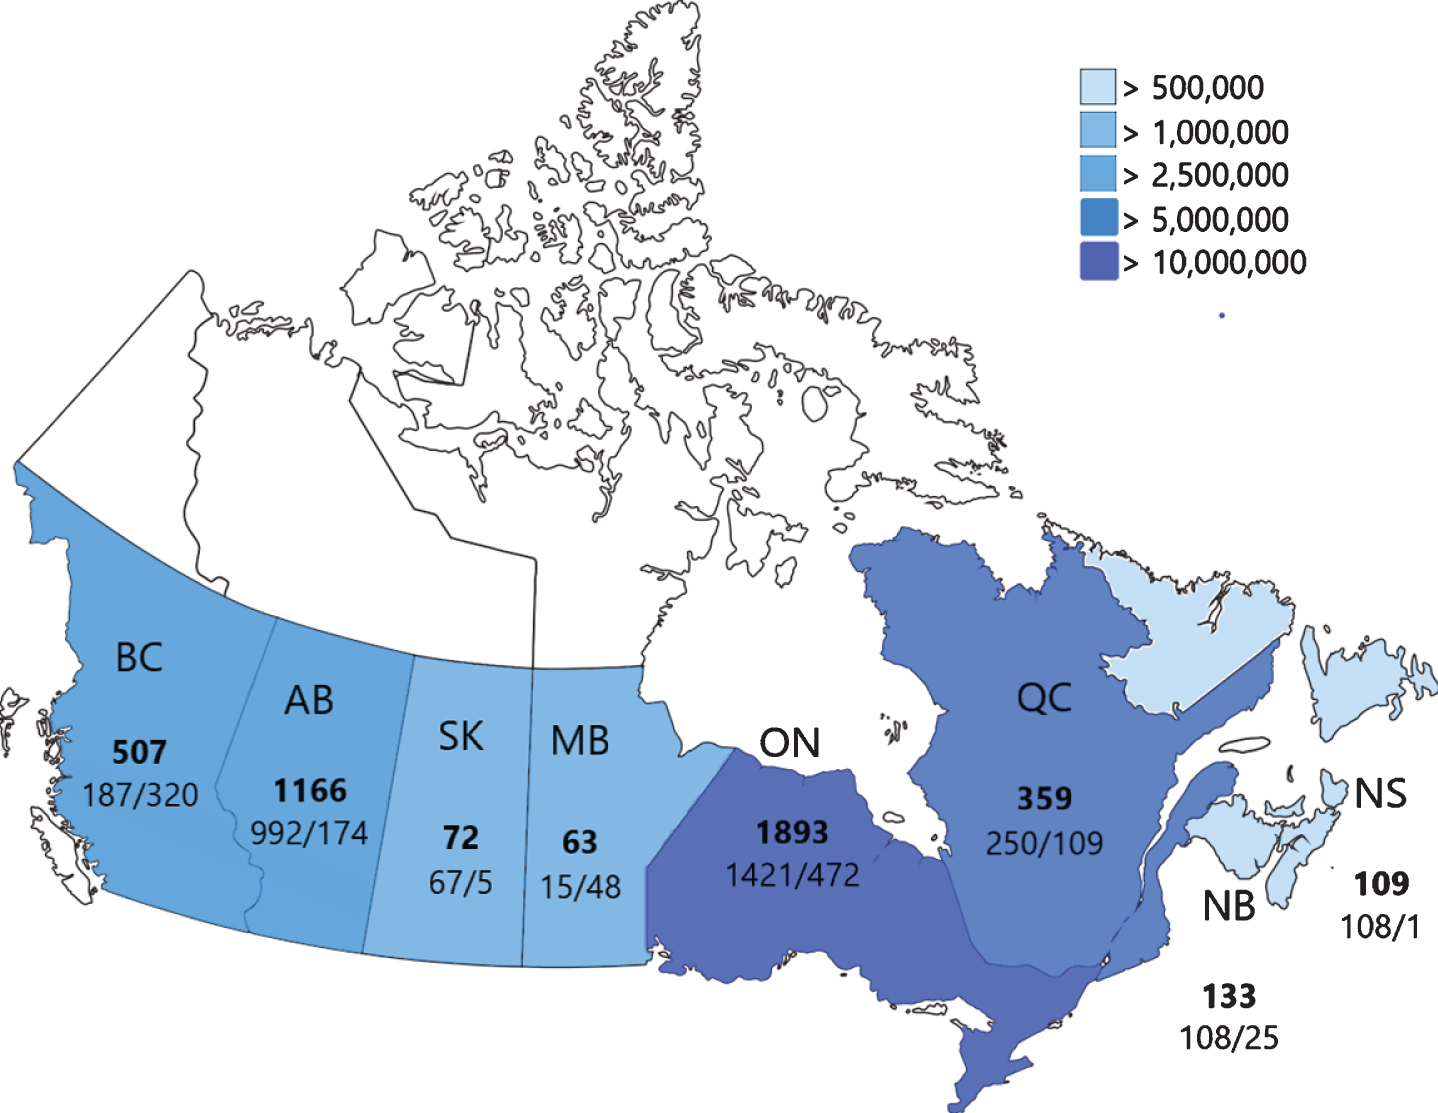 CNDR recruitment by province. Total number of registered individuals is shown in bold, followed by adult cases (left) and pediatric cases (right). Relative provincial and territorial populations are shown through color-coding for reference (Statistics Canada, 2018). BC = British Columbia; AB = Alberta; SK = Saskatchewan; MB = Manitoba; ON = Ontario; QC = Quebec; NB = New Brunswick; NS = Nova Scotia.